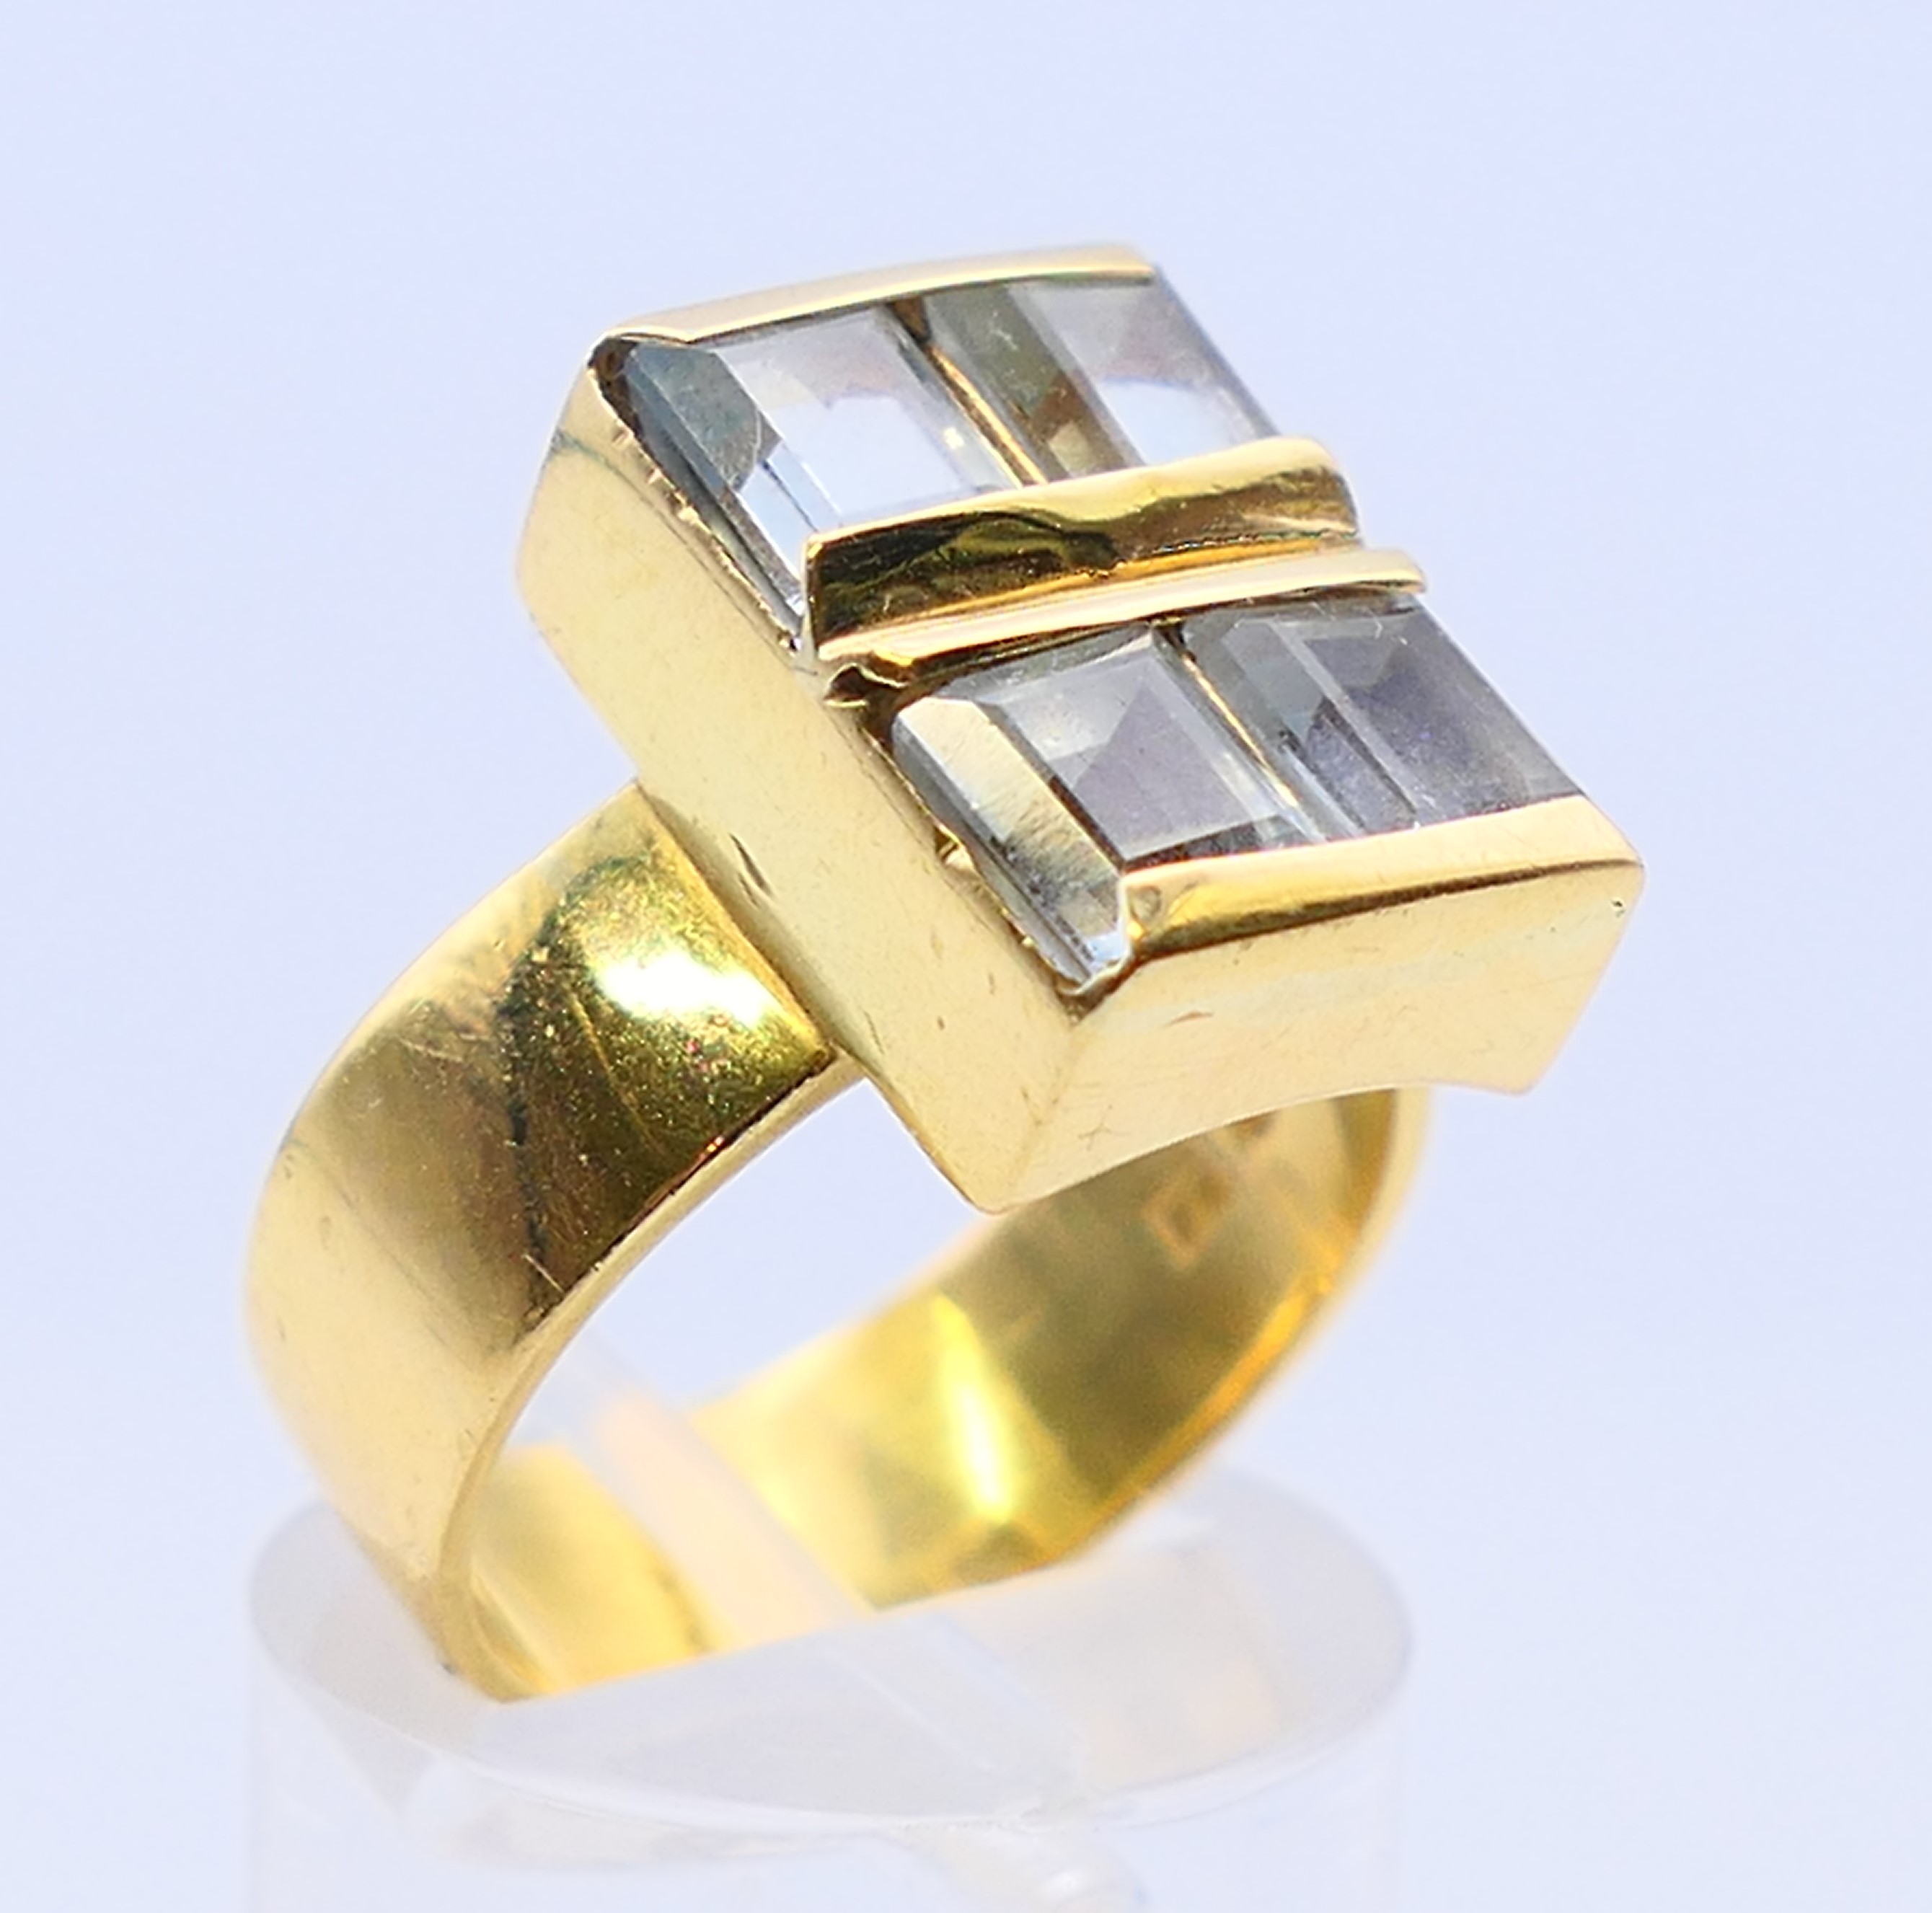 An 18 ct gold, aquamarine four stone ring, the emerald cut aquamarines 6 x 5mm x 3.9mm. Ring size O. - Image 3 of 7